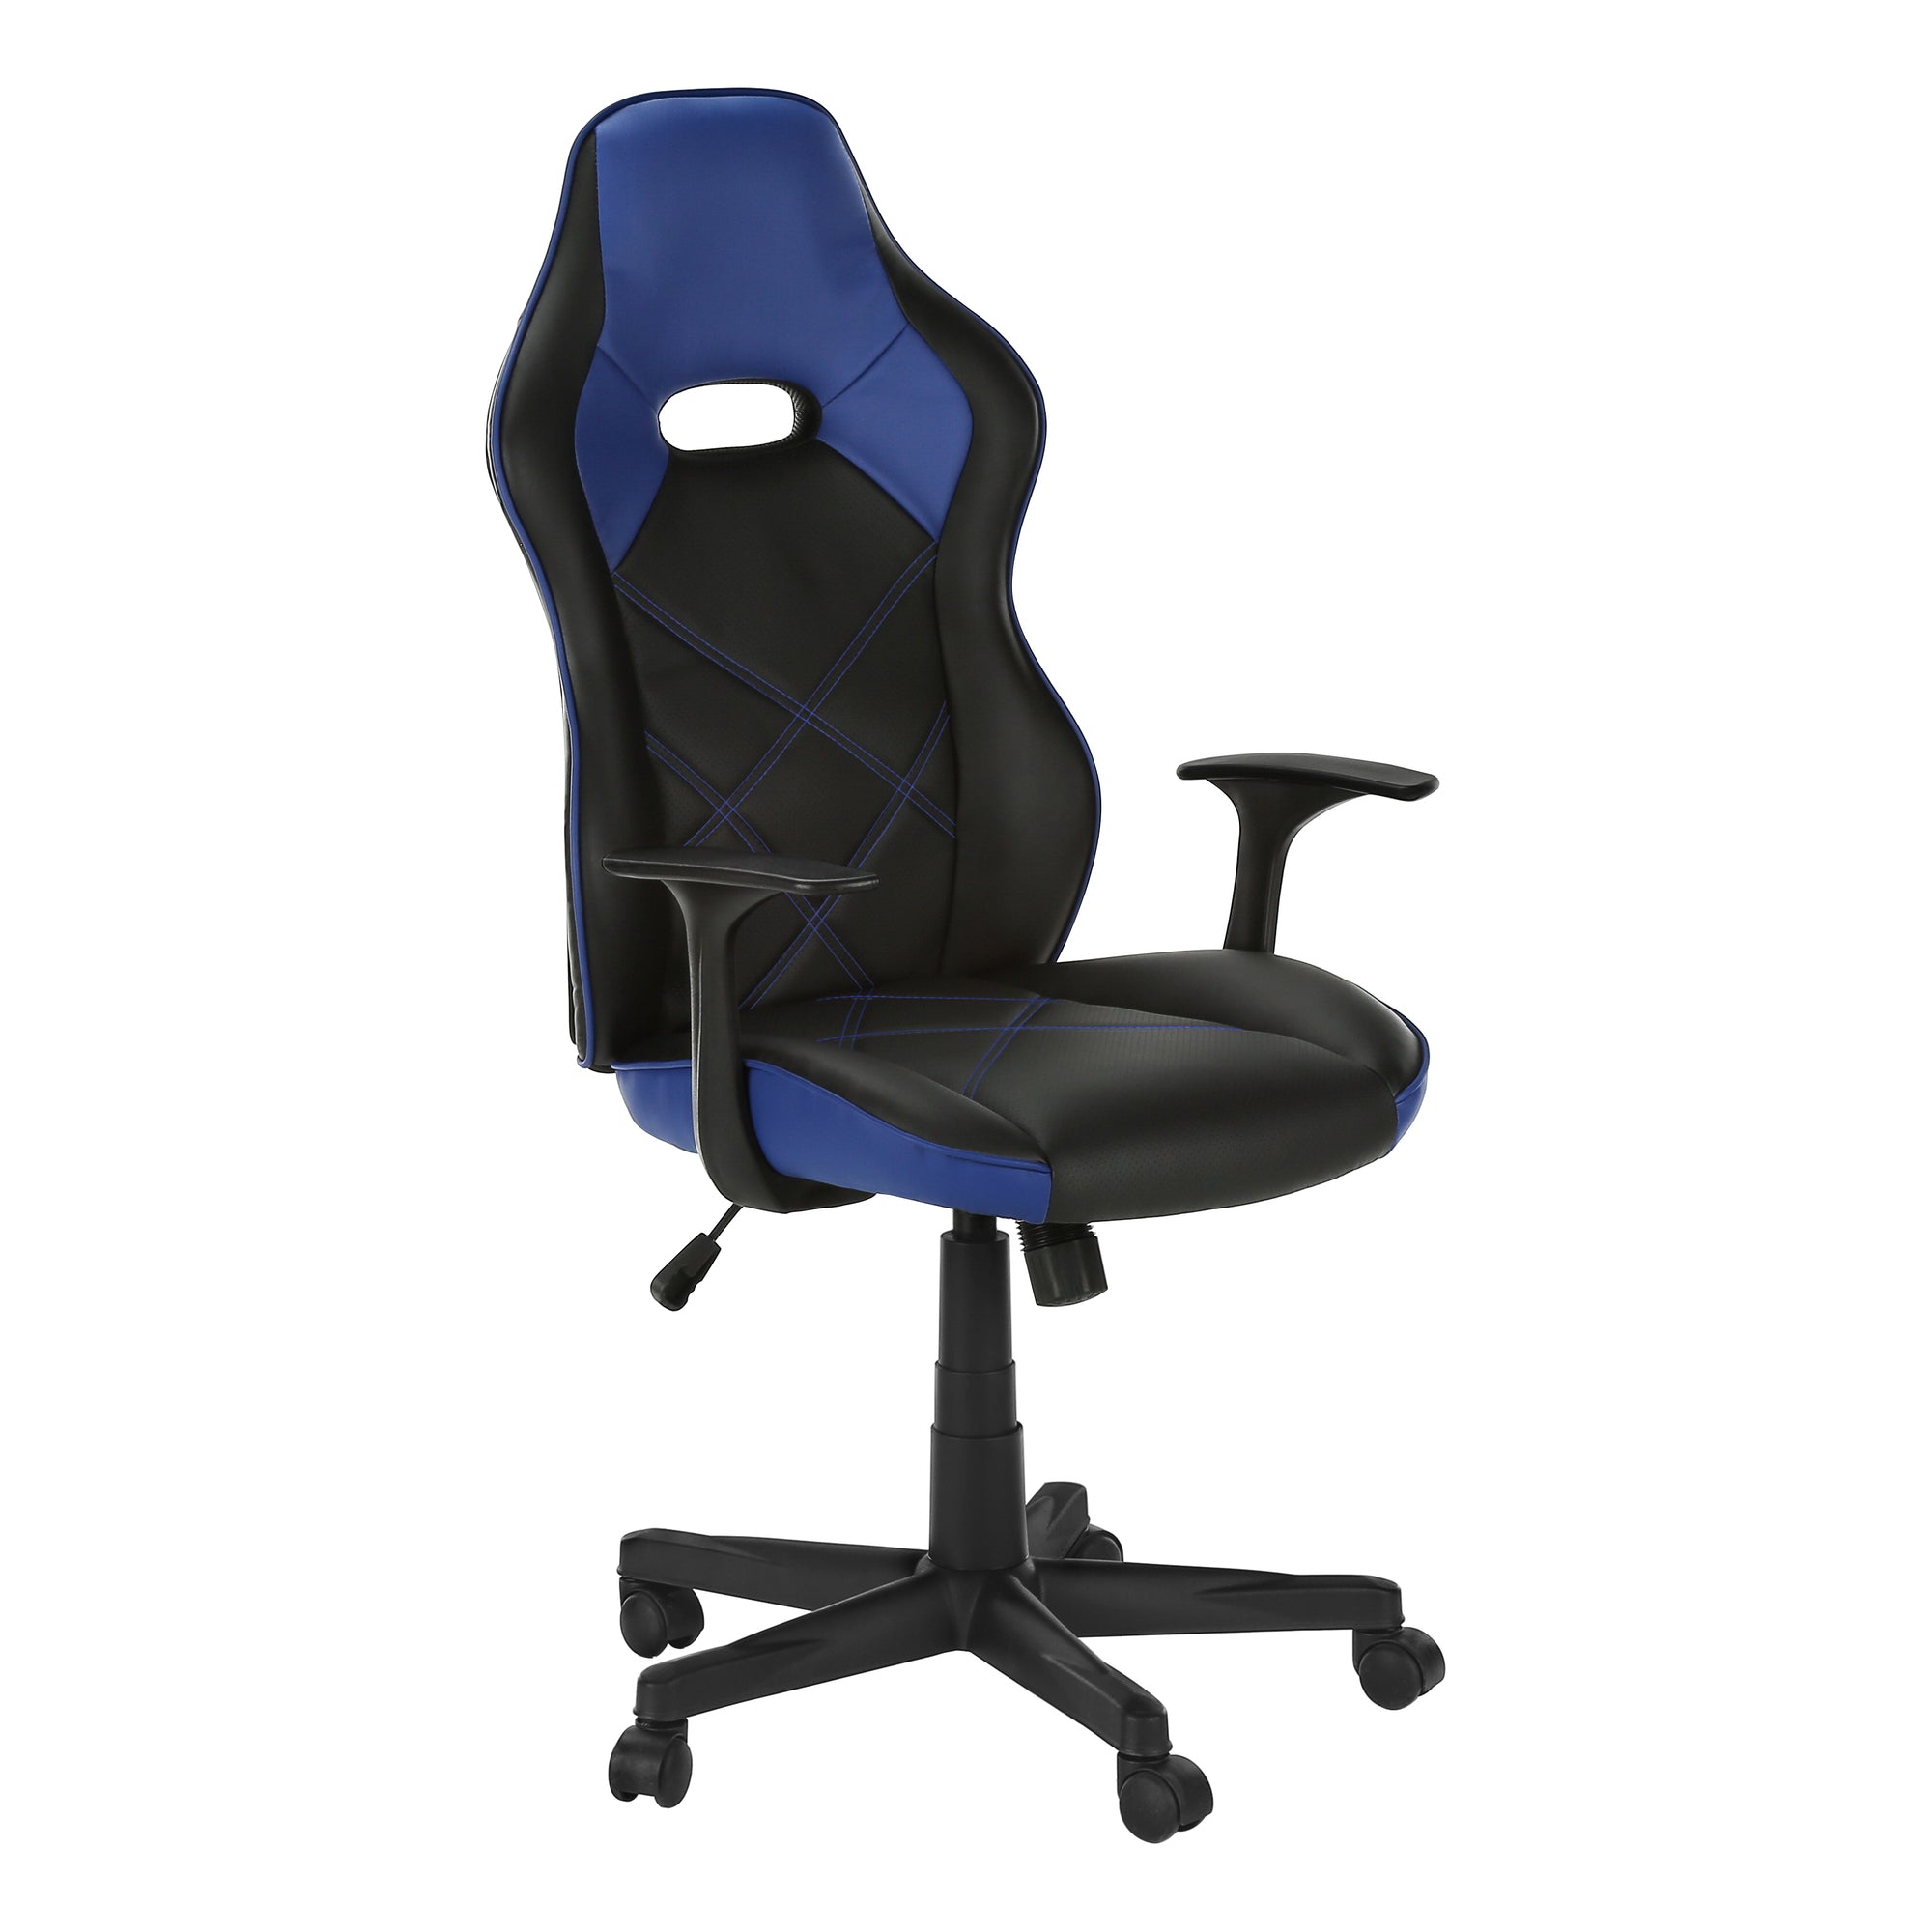 MN-277328    Office Chair - Gaming / Black / Blue Leather-Look